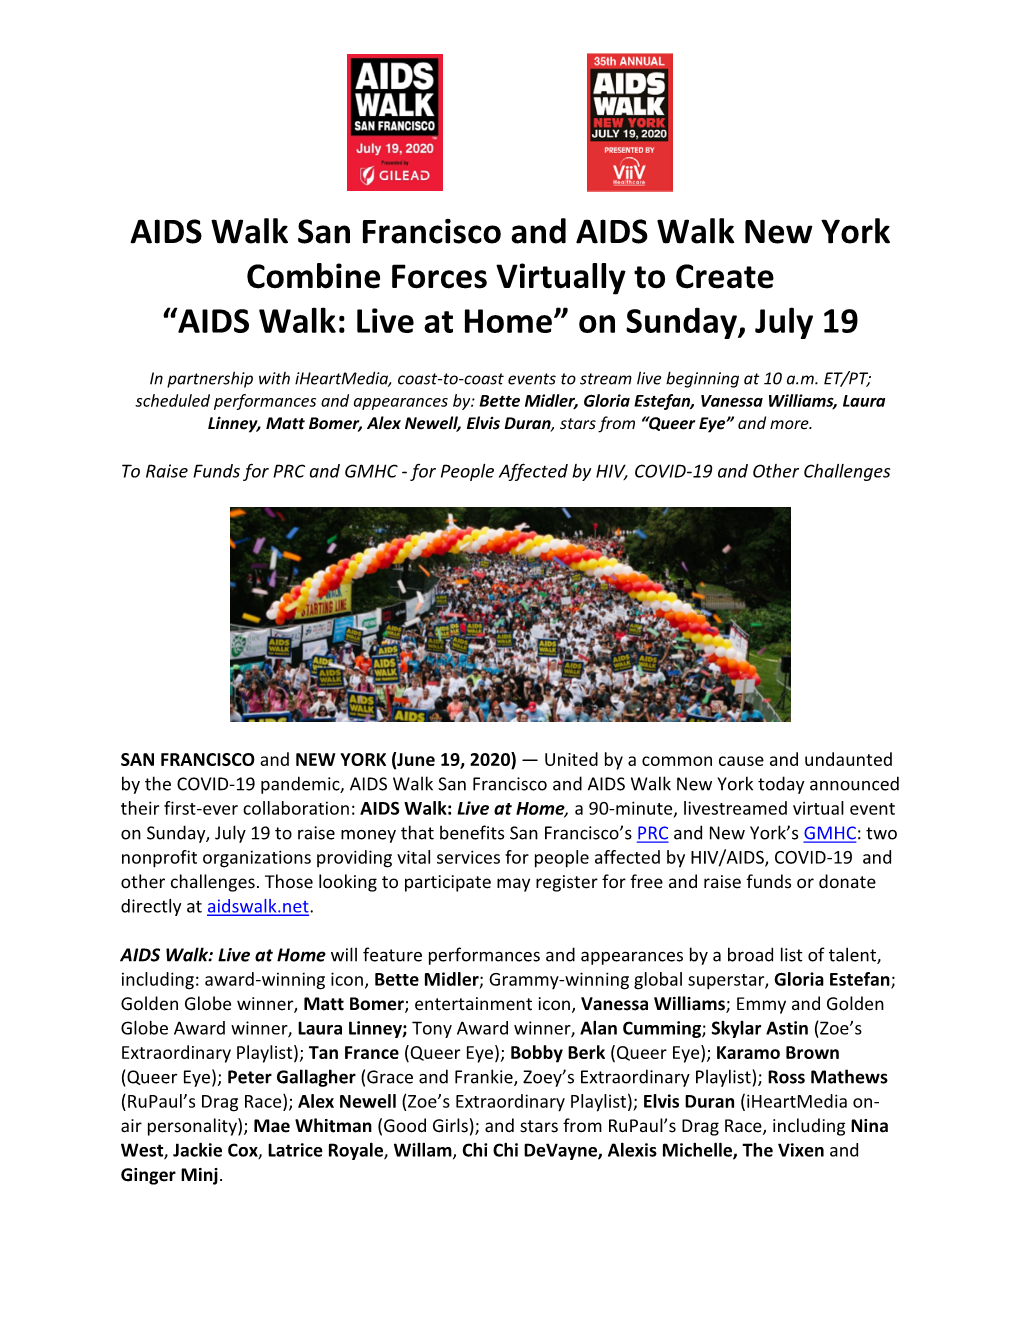 AIDS Walk: Live at Home” on Sunday, July 19